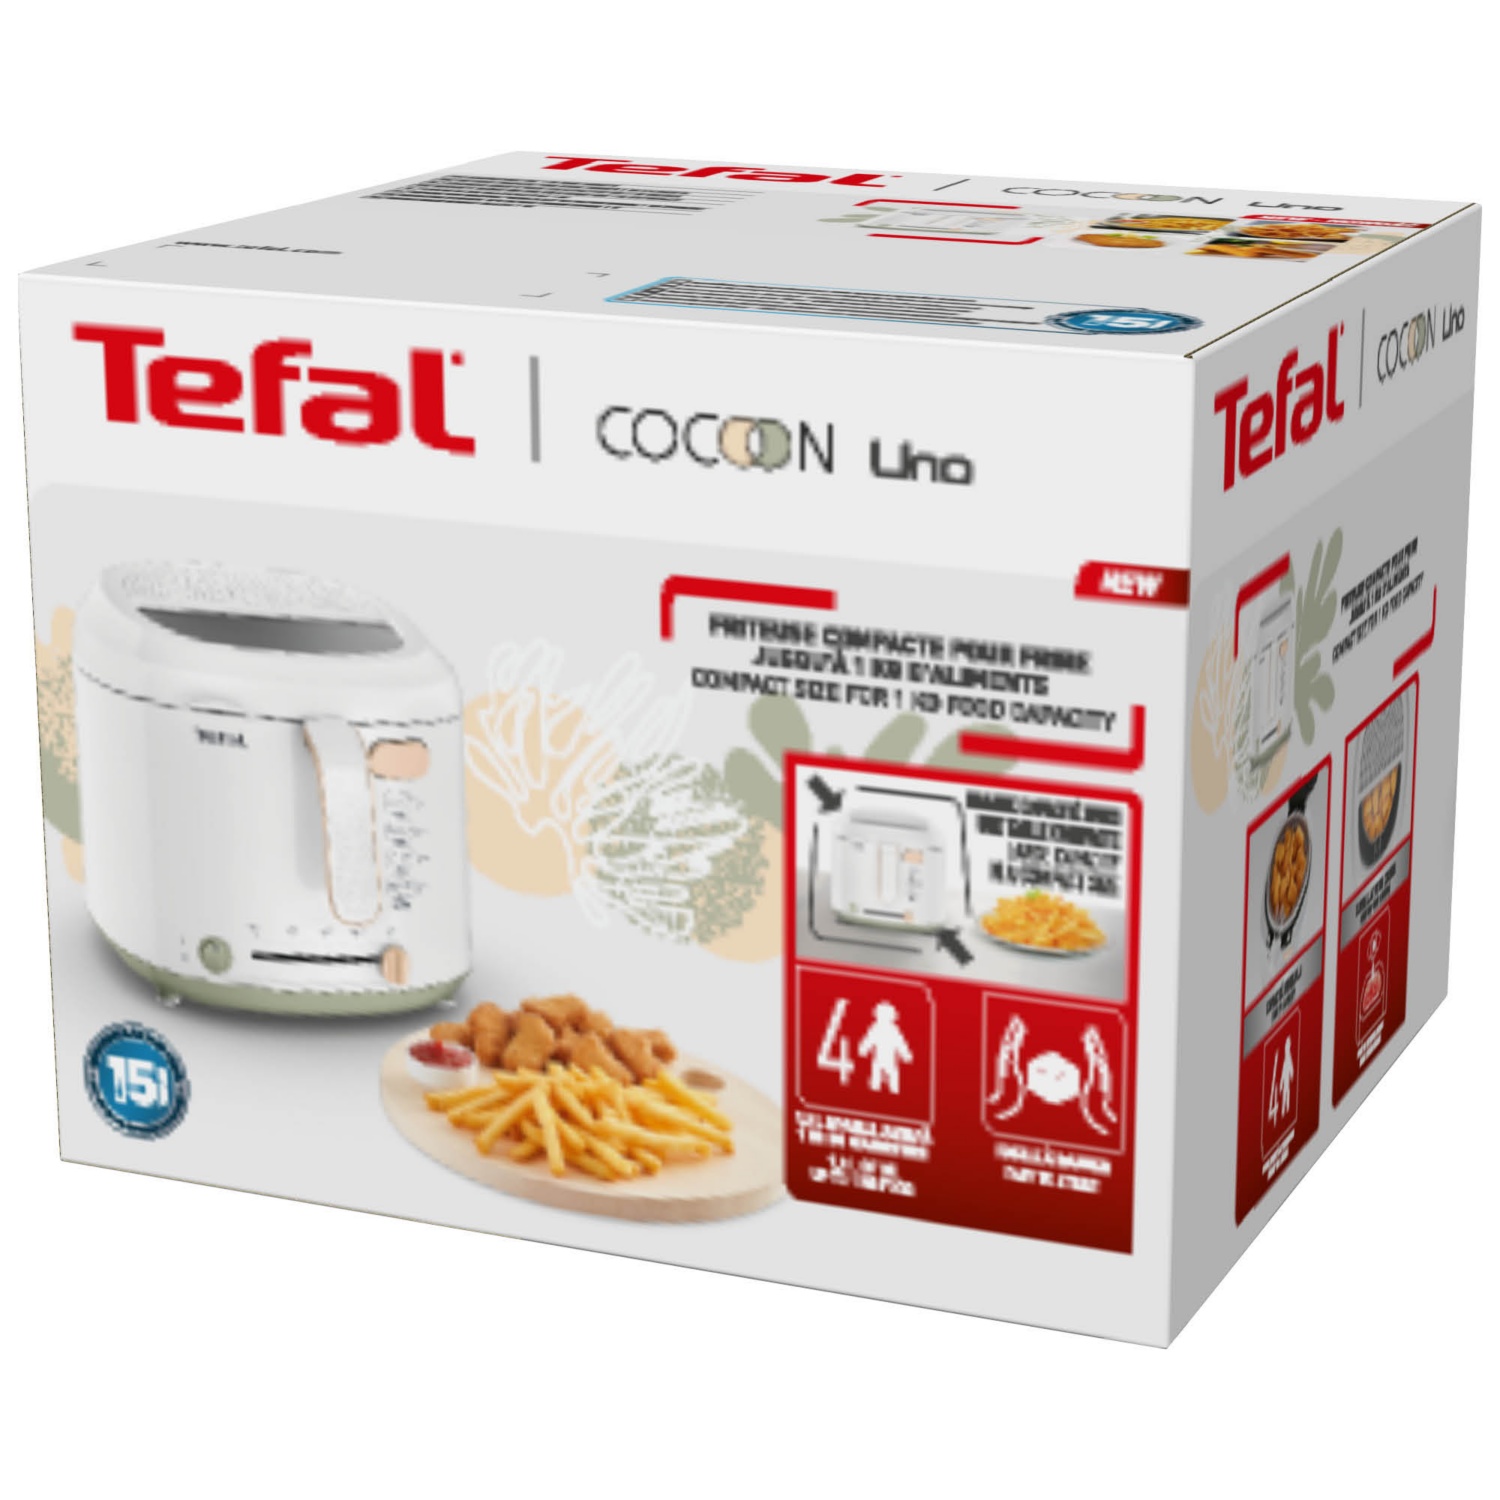 TEFAL Cocoon Uno Fritteuse FF2030CH